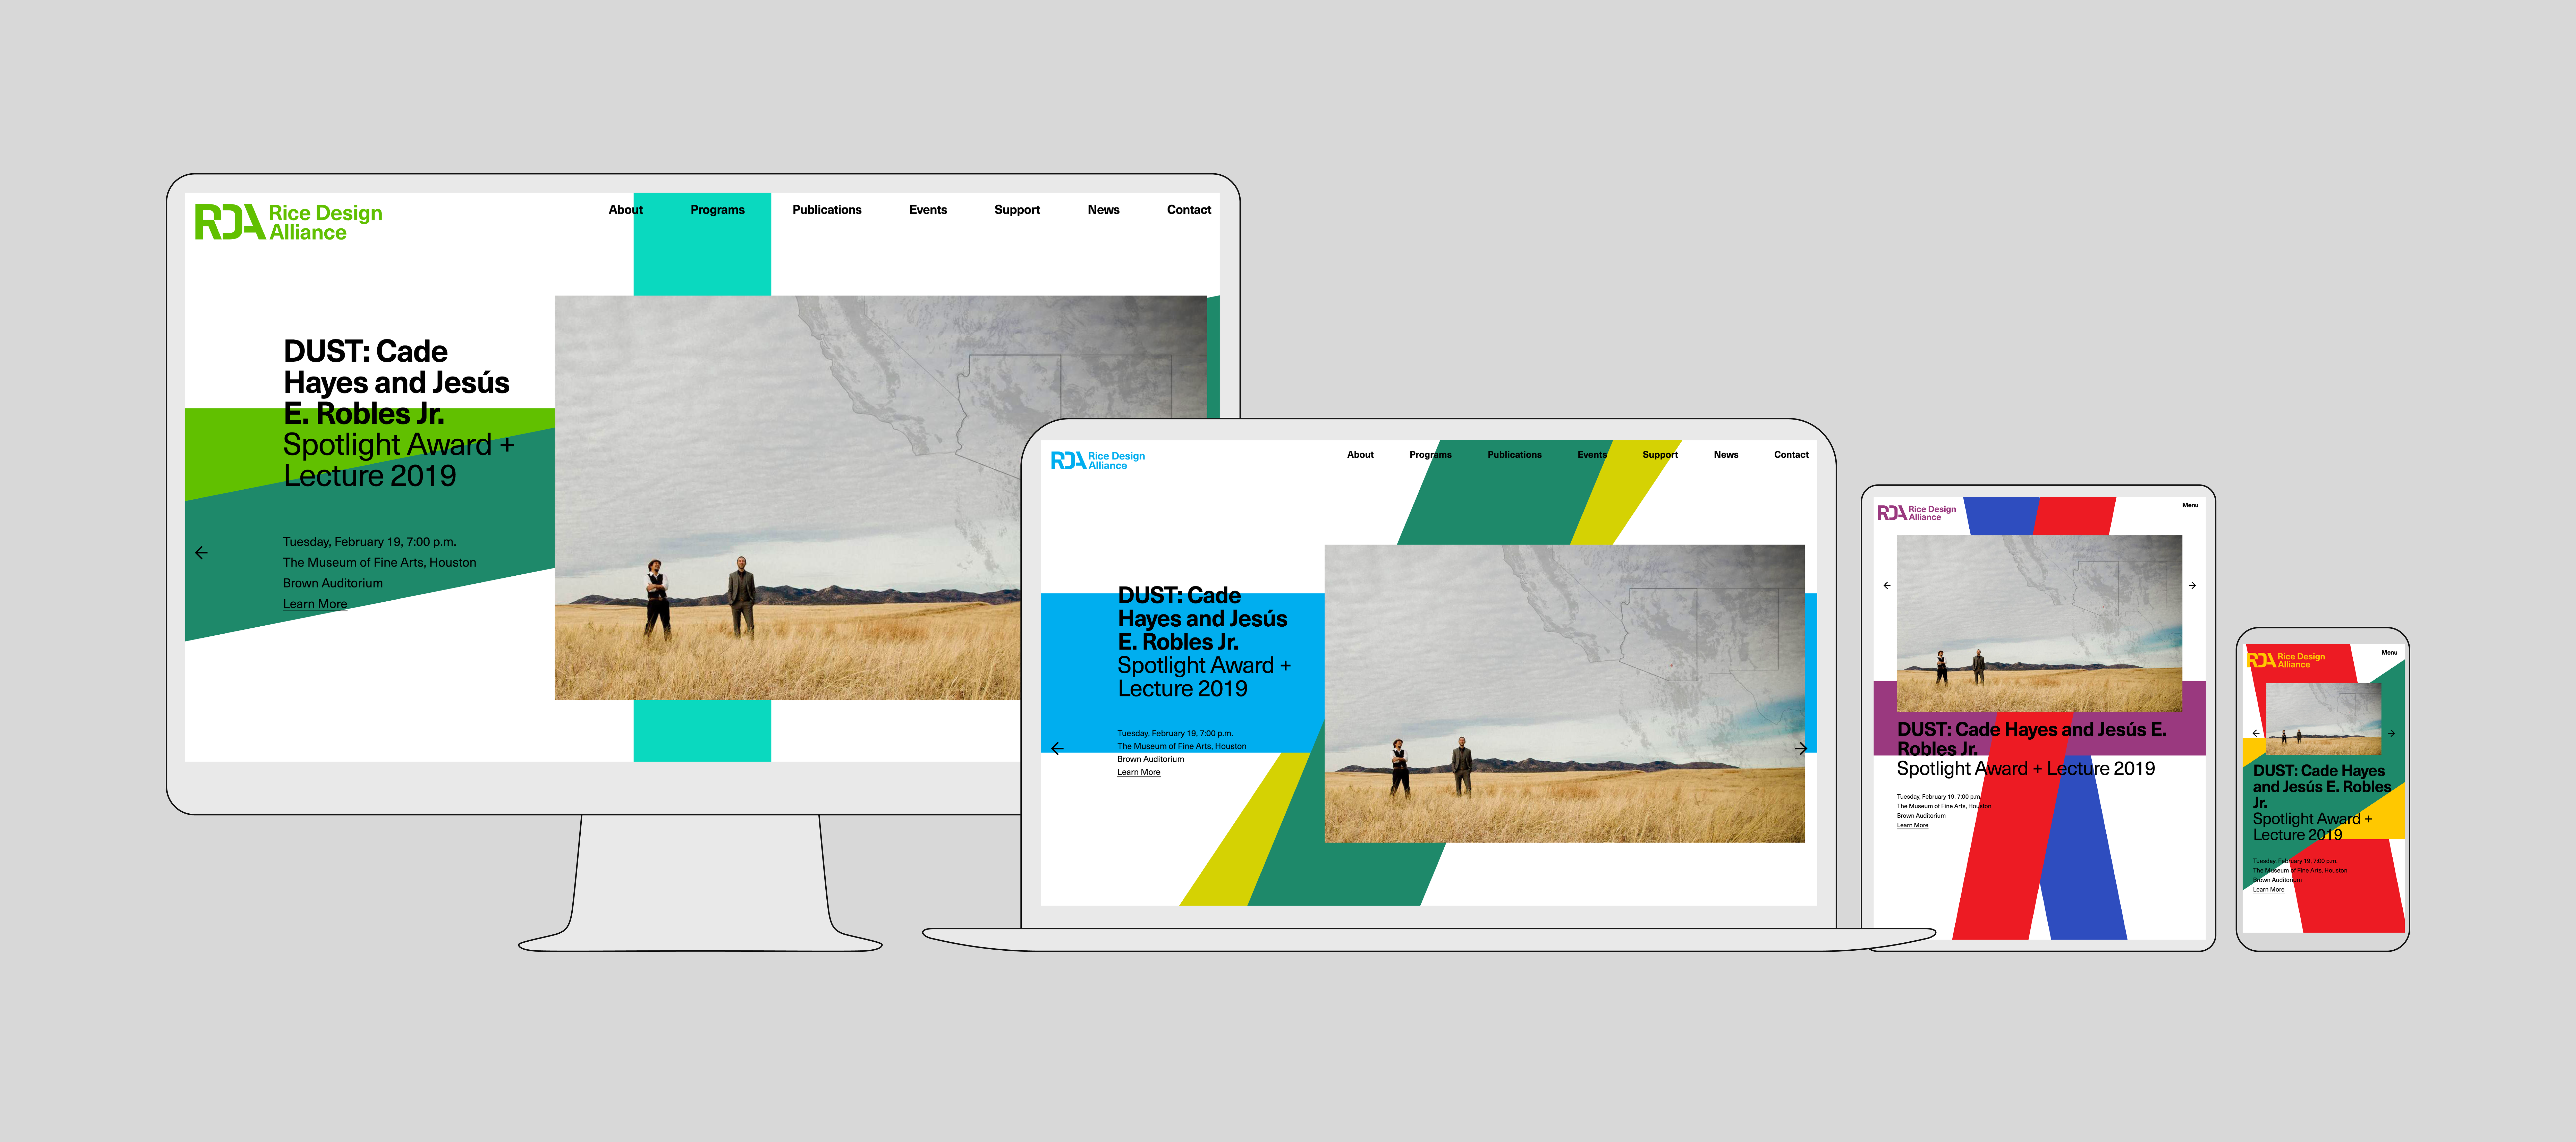 Responsive design from the Rice Design Alliance website, by Talia Cotton and The Original Champions of Design